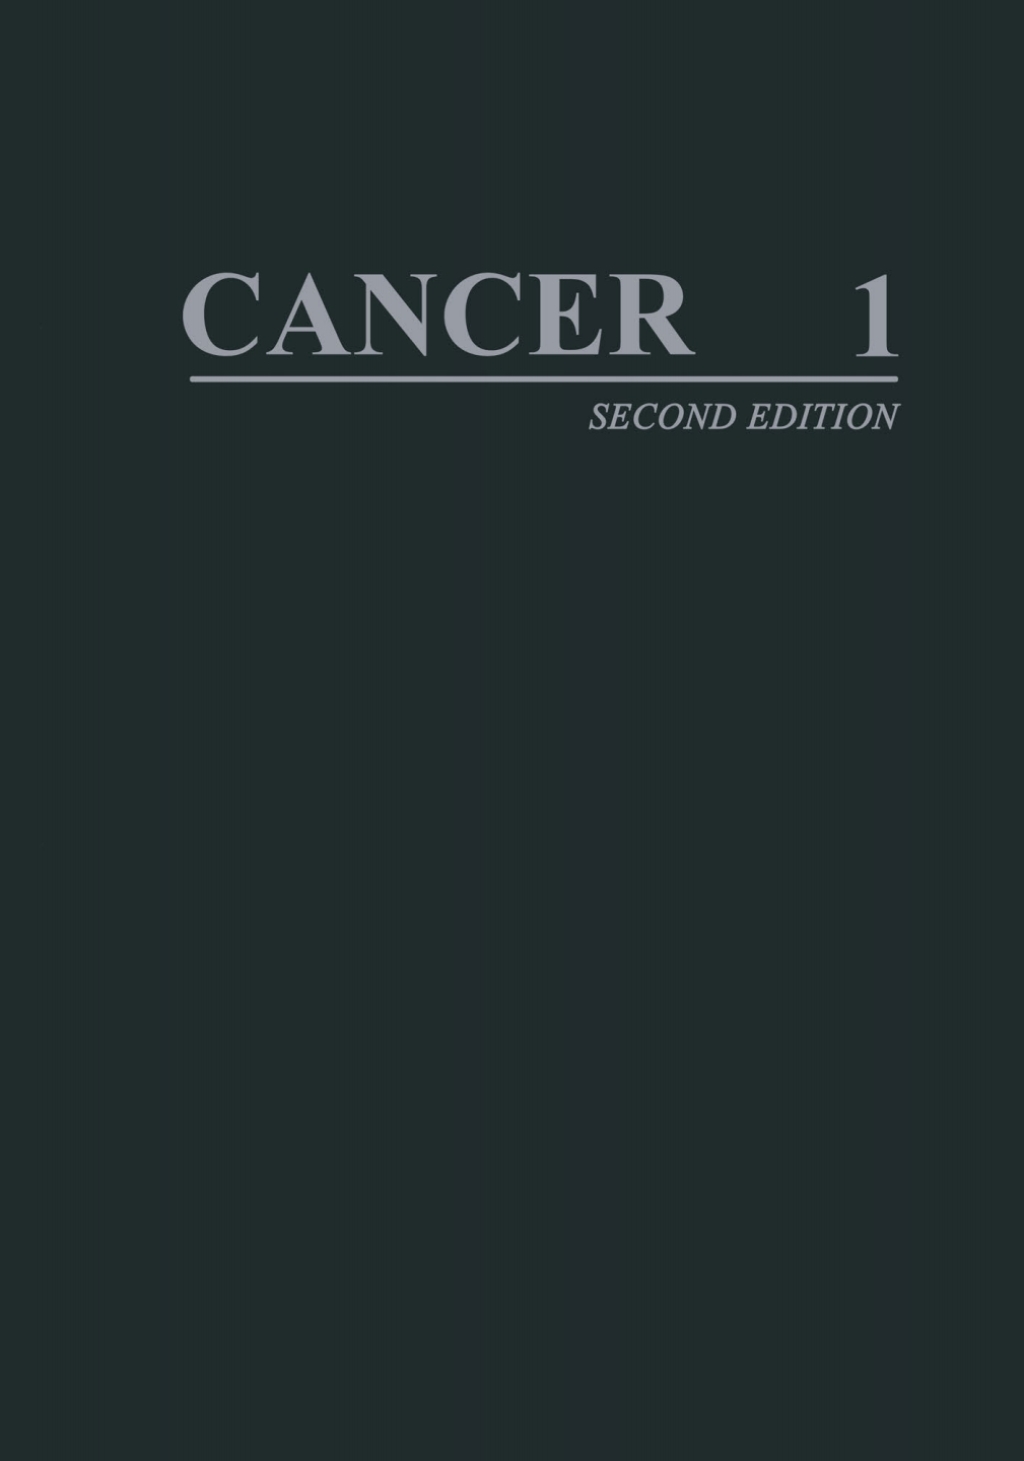 Etiology: Chemical and Physical Carcinogenesis (eBook Rental) - Frederick F. Becker,